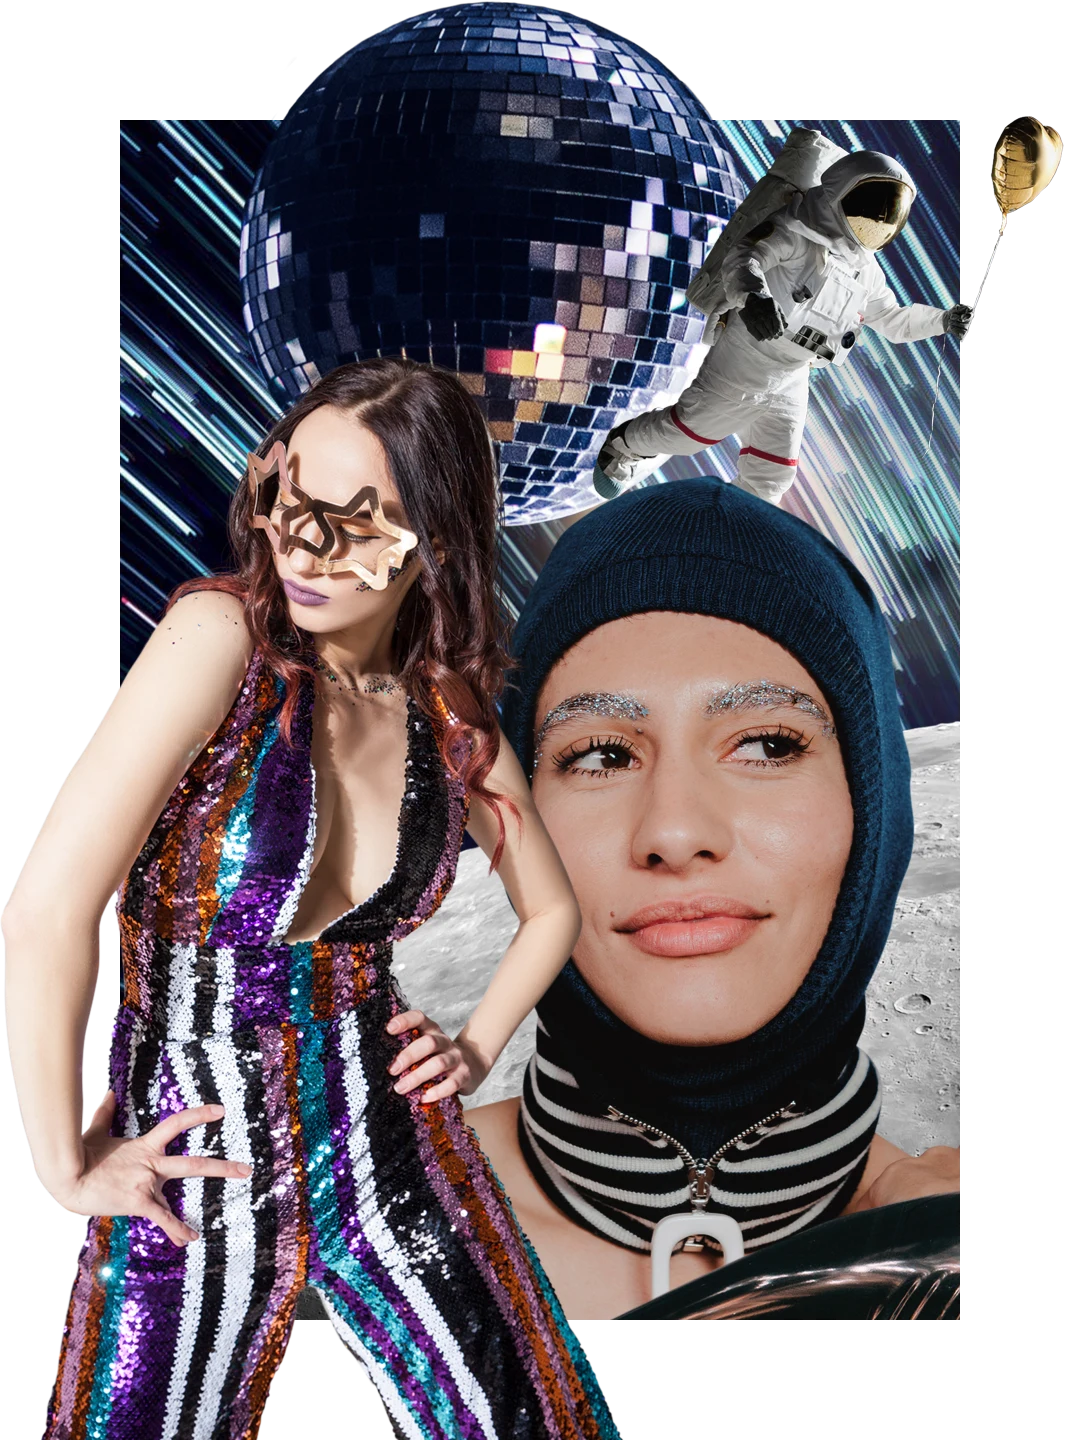 Backdrop of outer space with a large disco ball and astronaut at top. White woman with star glasses in striped jumpsuit at left. Arab woman in black balaclava at right. Large moon in the bottom background.
